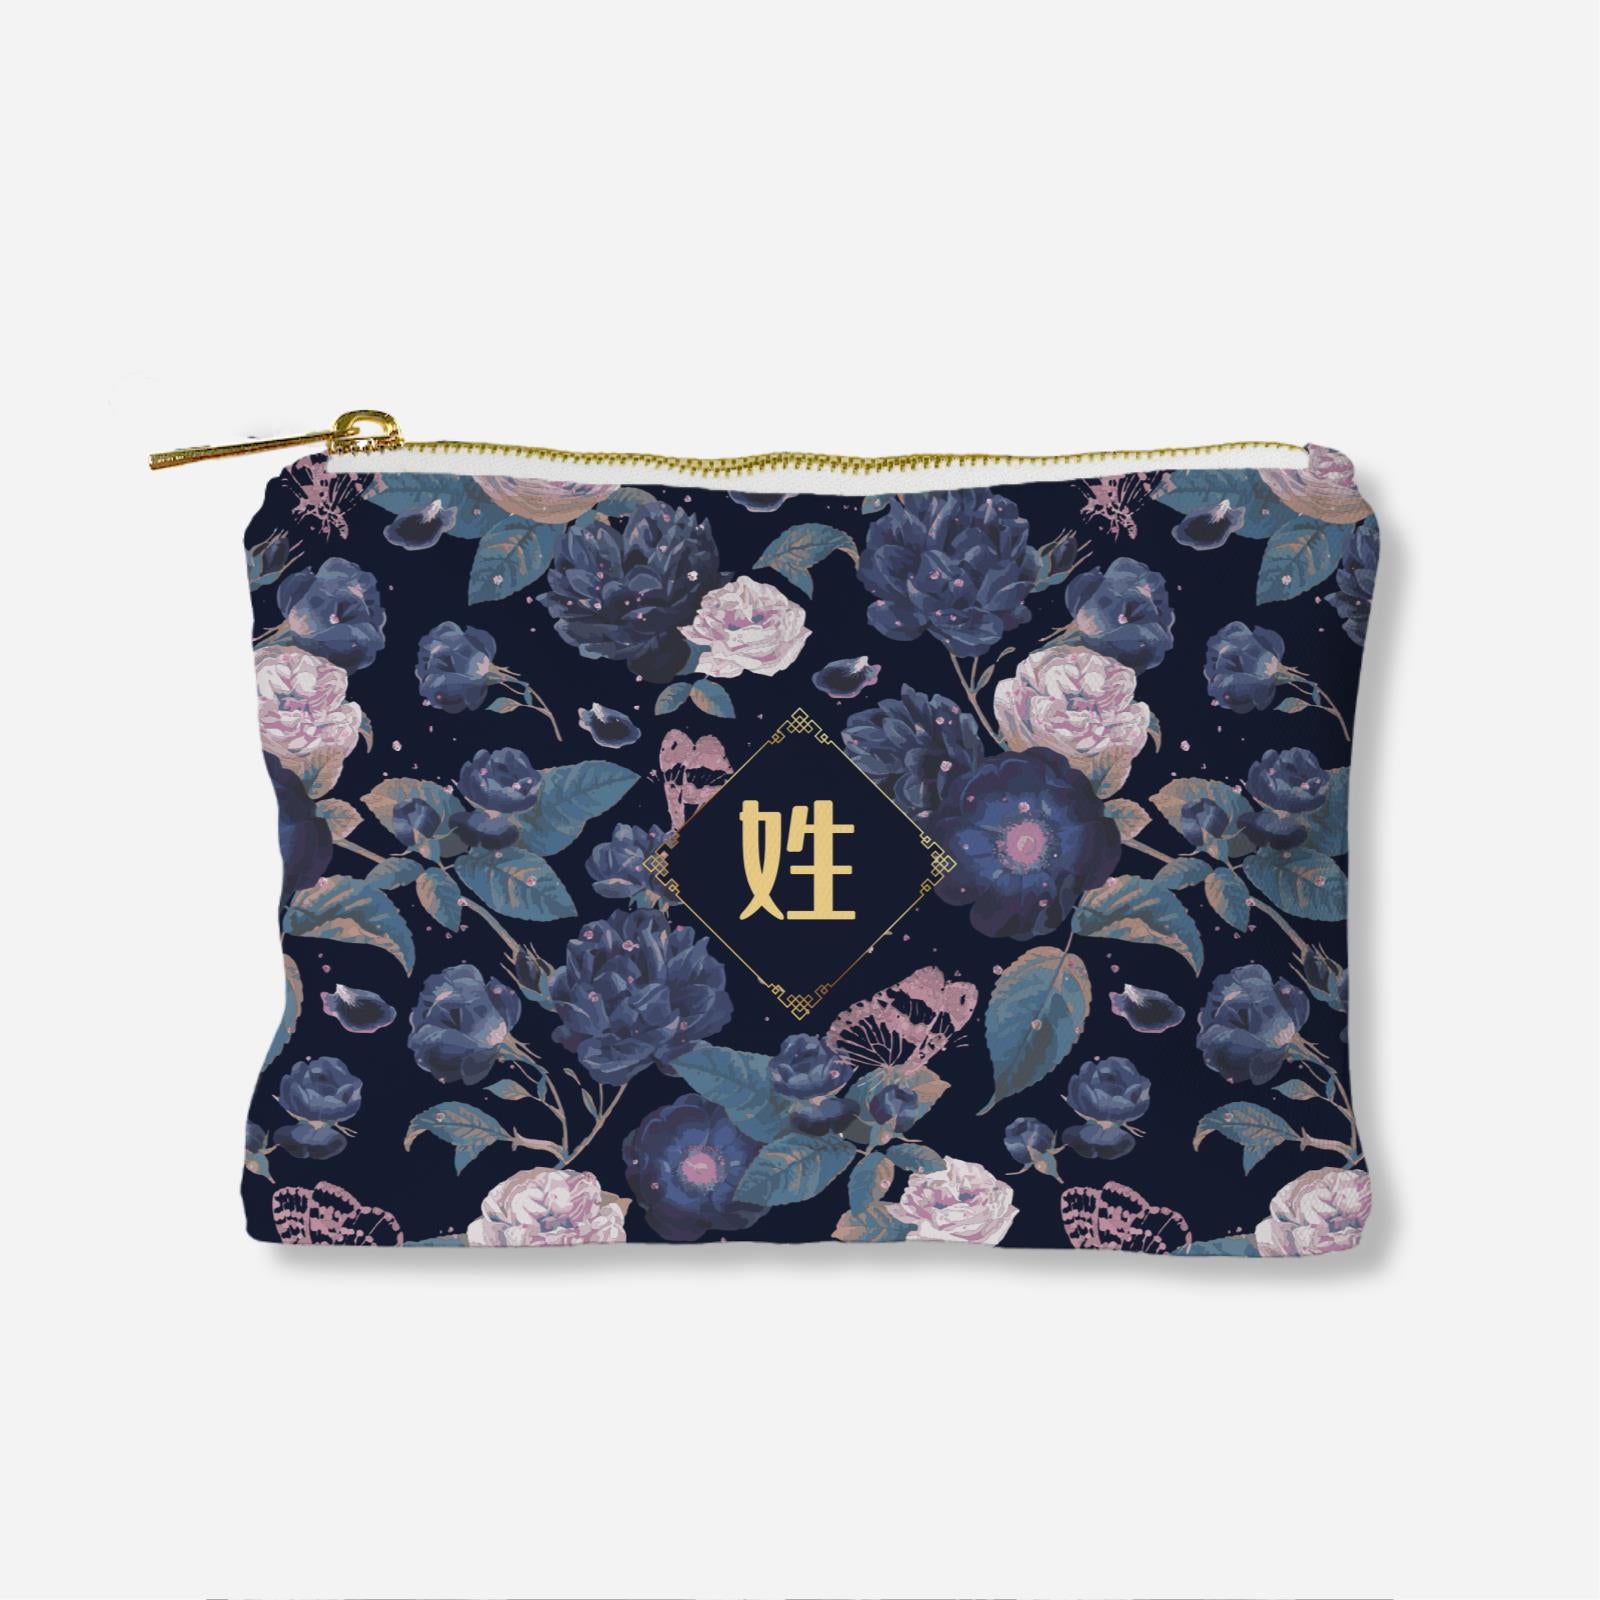 Royal Floral Series Full Print Zipper Pouch With Chinese Personalization